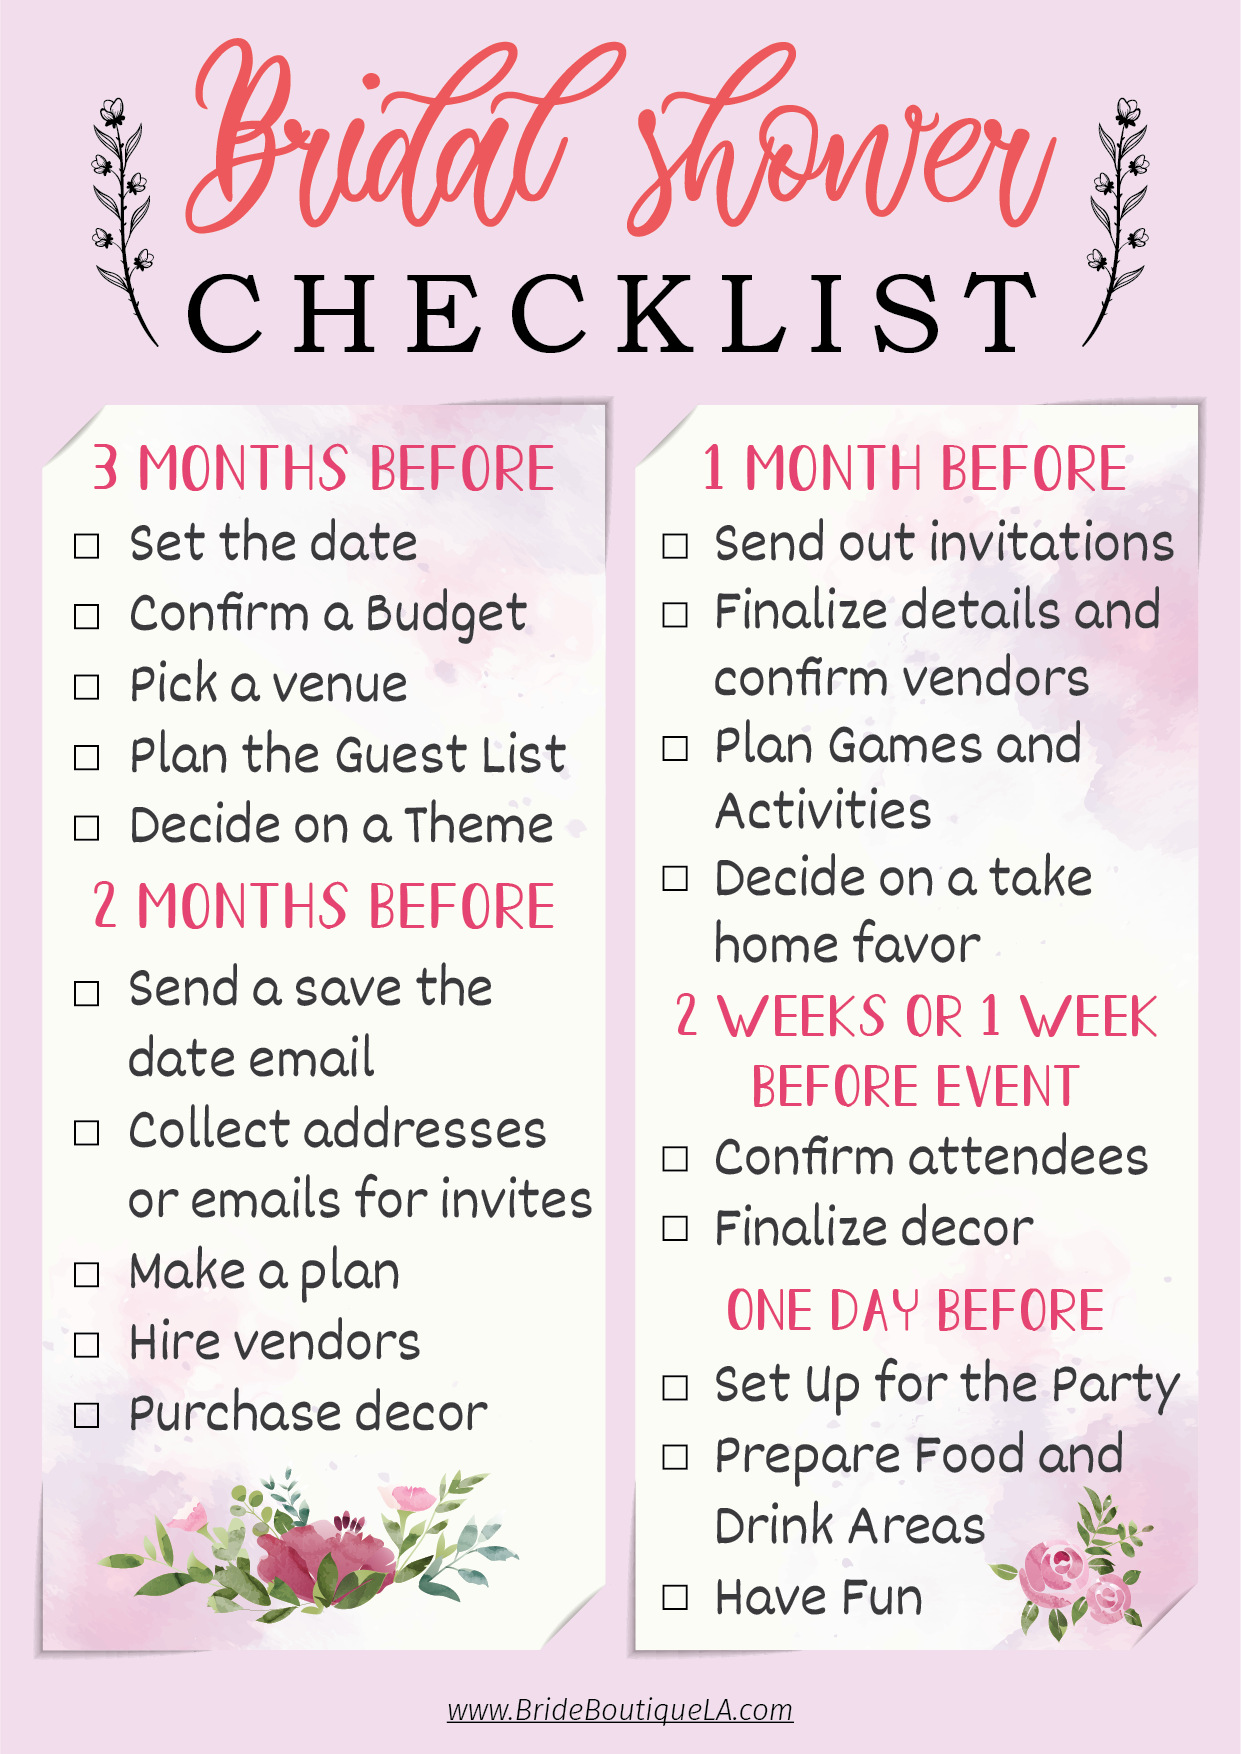 The Free Printable Bridal Shower Checklist That Everyone Needs ...